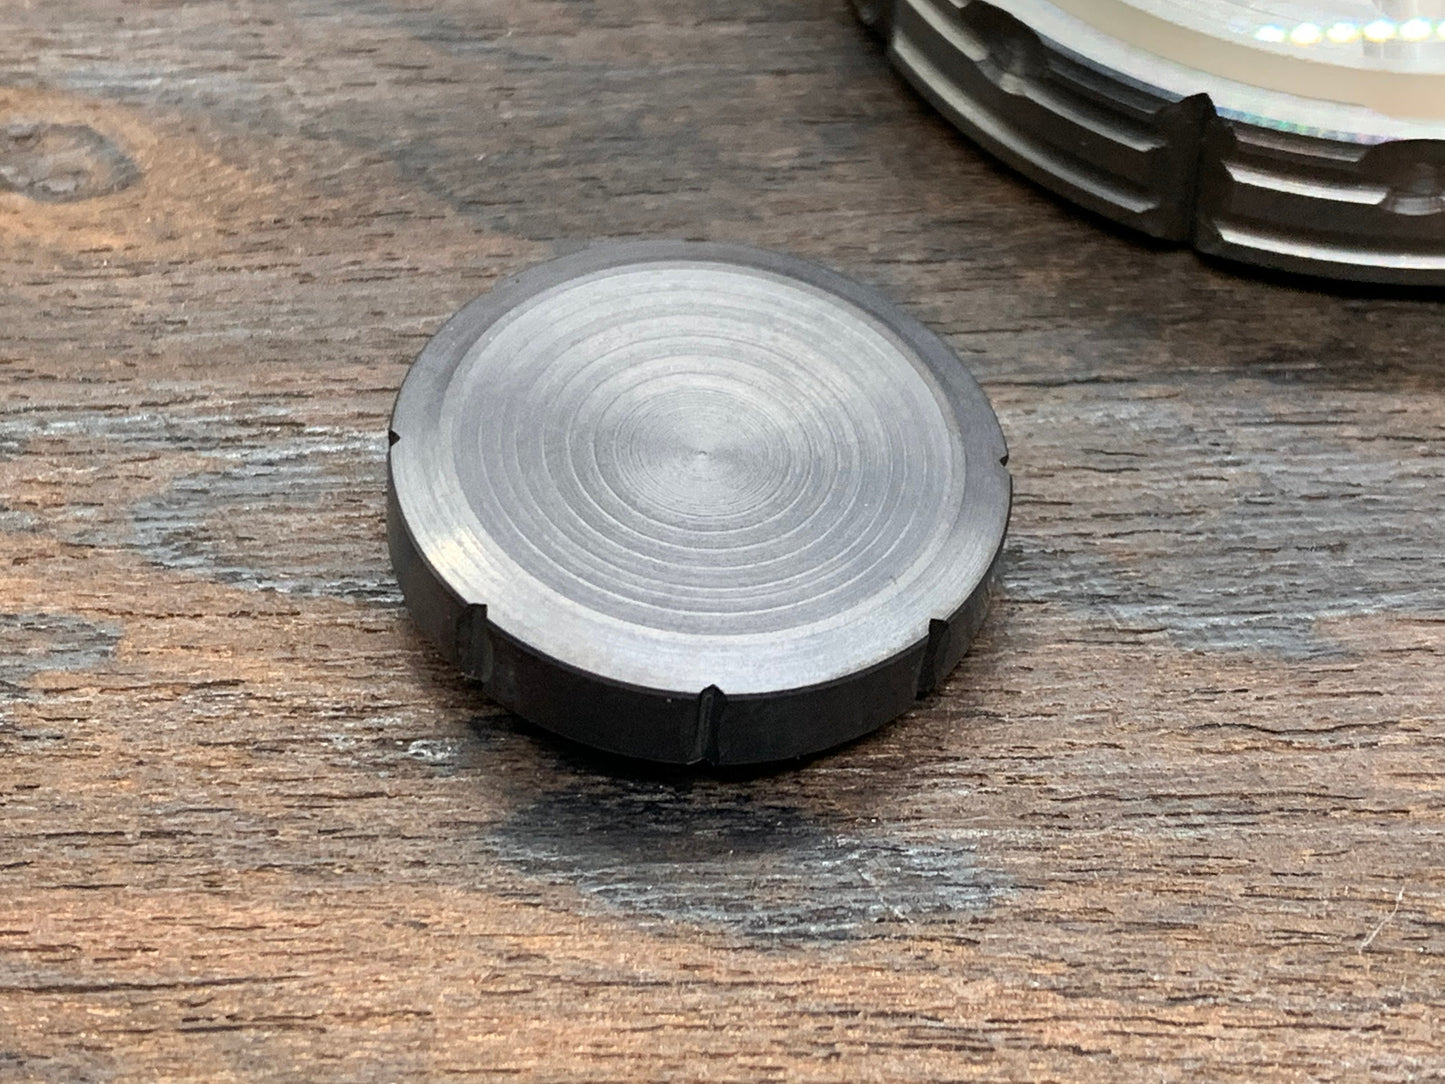 Black TUNGSTEN Spinning Worry Coin Spinning Top